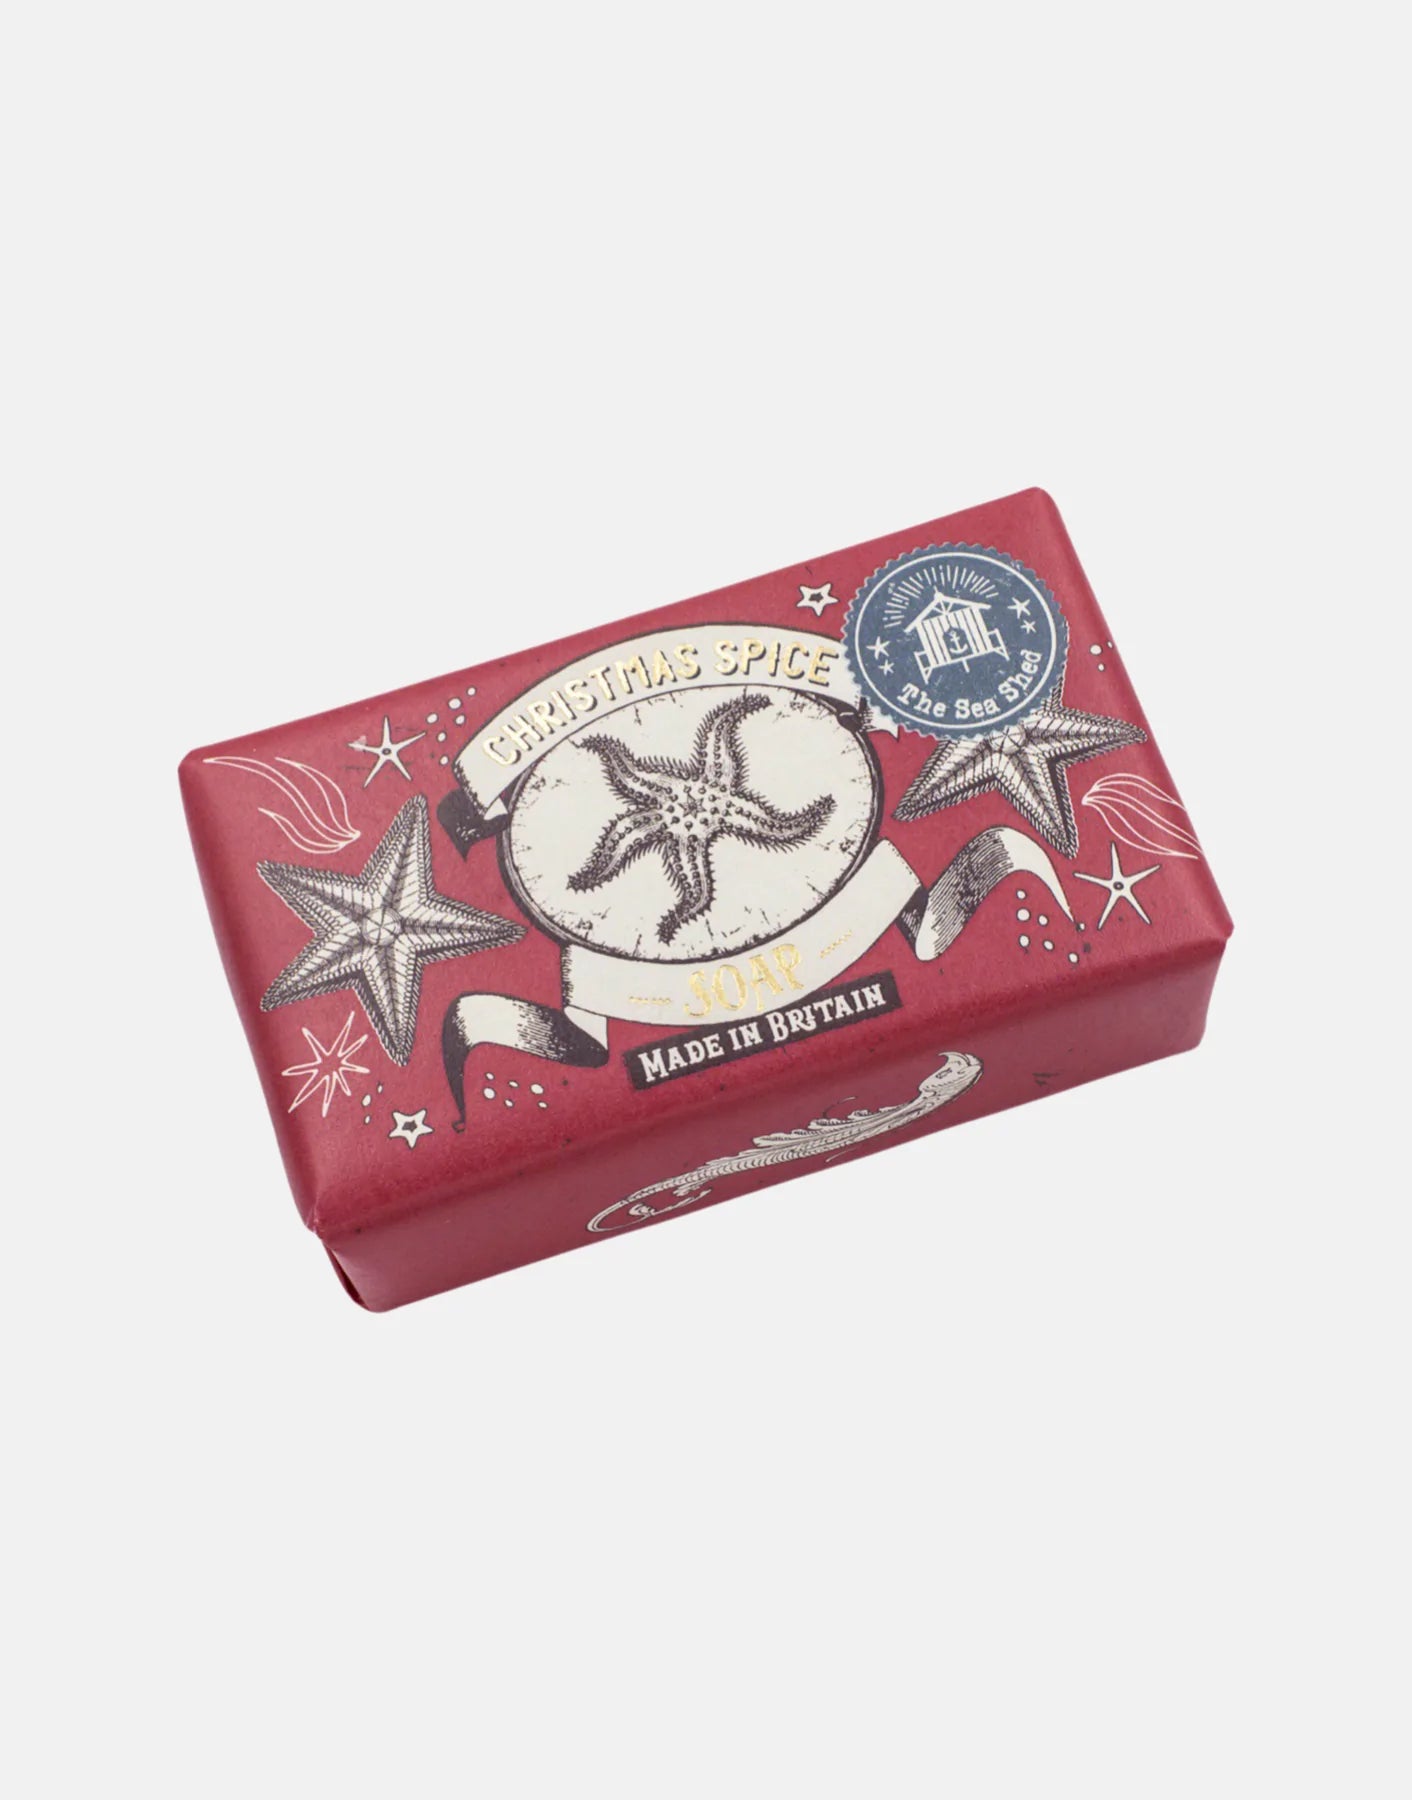 Christmas Spice Soap, The Sea Shed, 190g